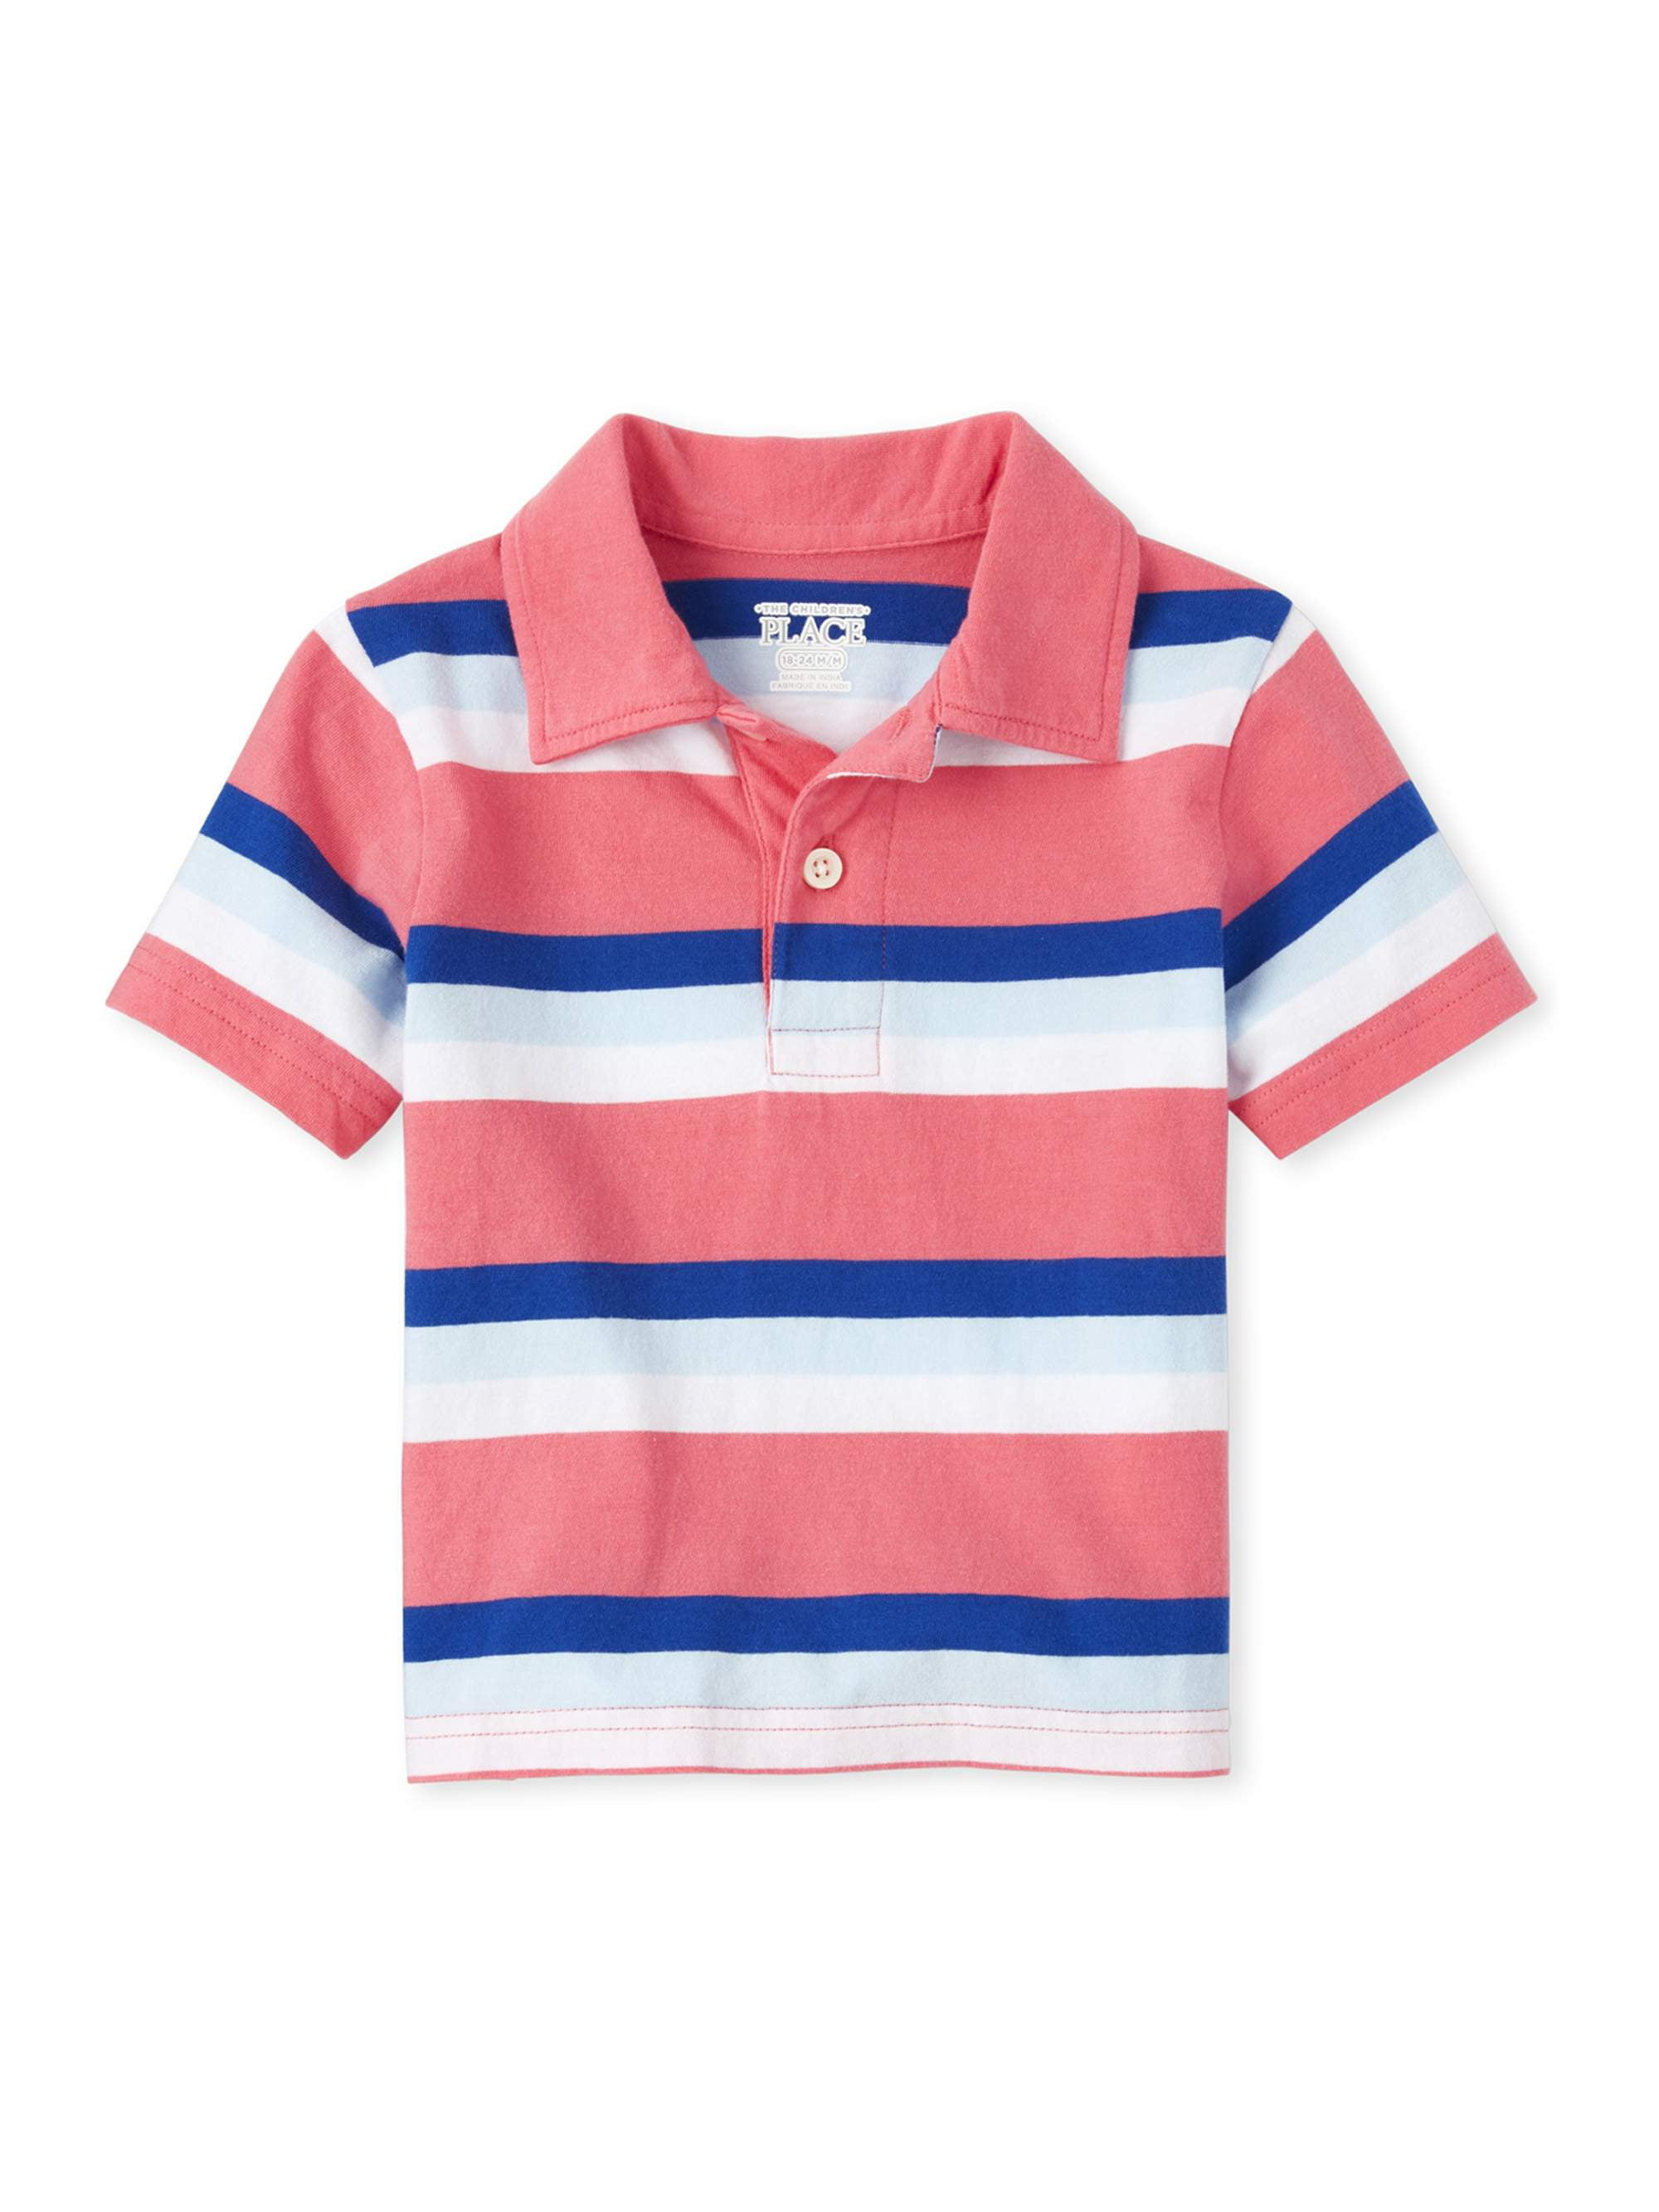 5T NEW CHILDREN'S PLACE BOYS BLUE & RED STRIPED SHORT SLEEVE POLO SHIRT 4T 